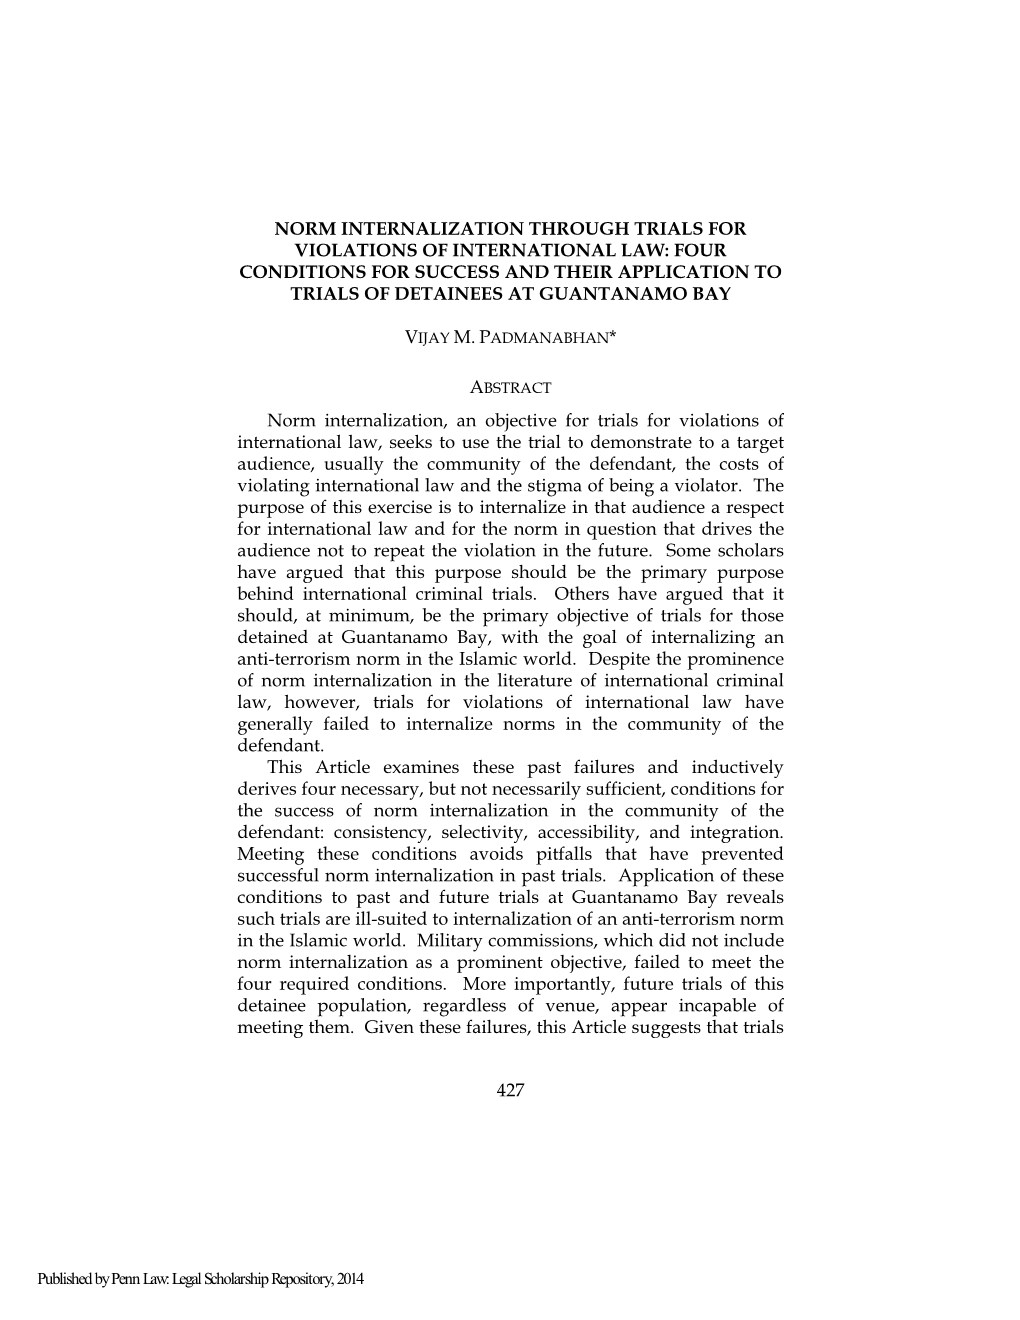 Norm Internationalization Through Trials for Violations of International Law: Four Conditions for Success and Their Application